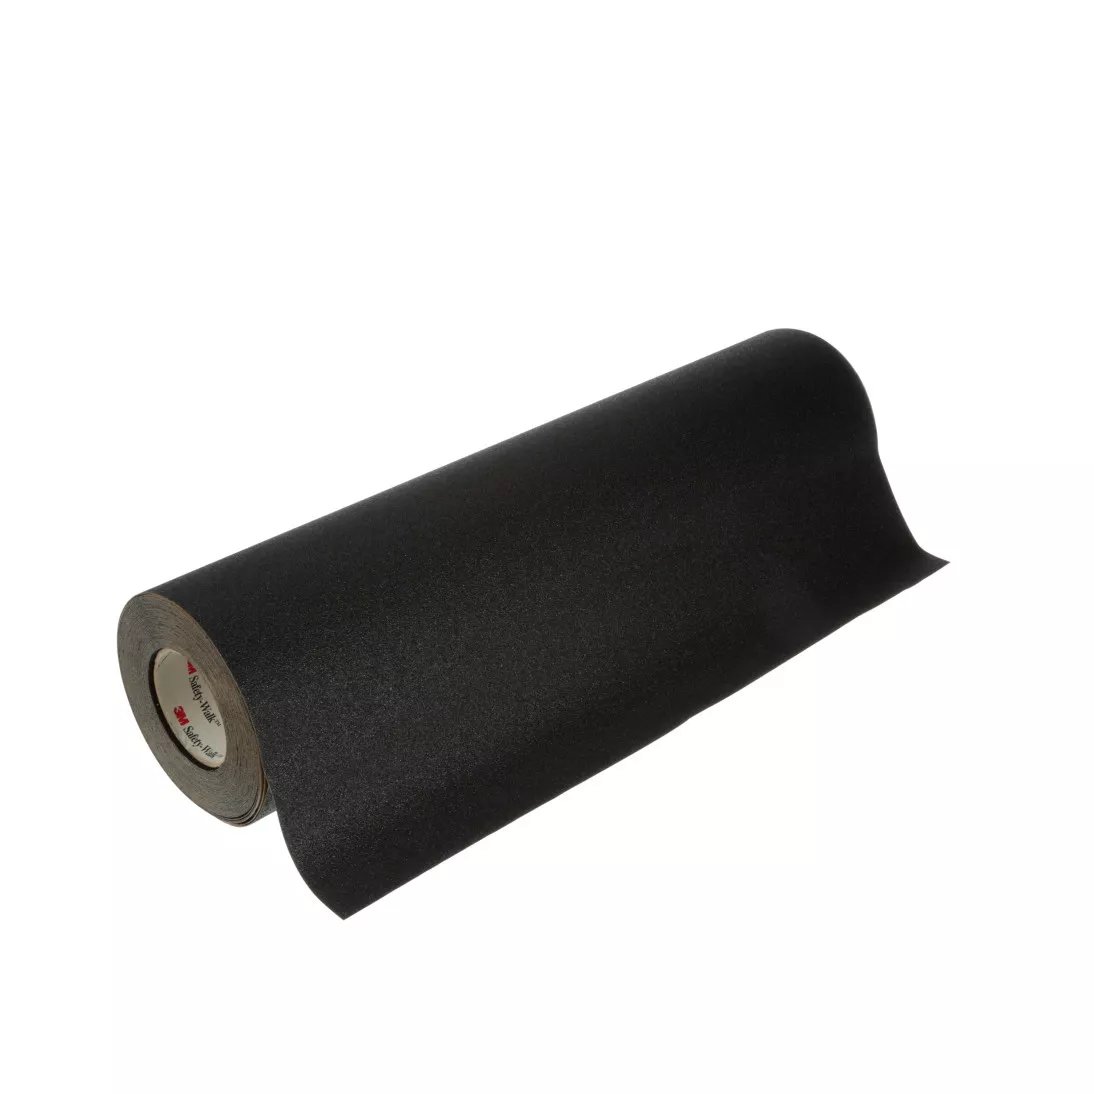 3M™ Safety-Walk™ Slip-Resistant General Purpose Tapes & Treads 610,
Black, 49.25 in x 120 ft